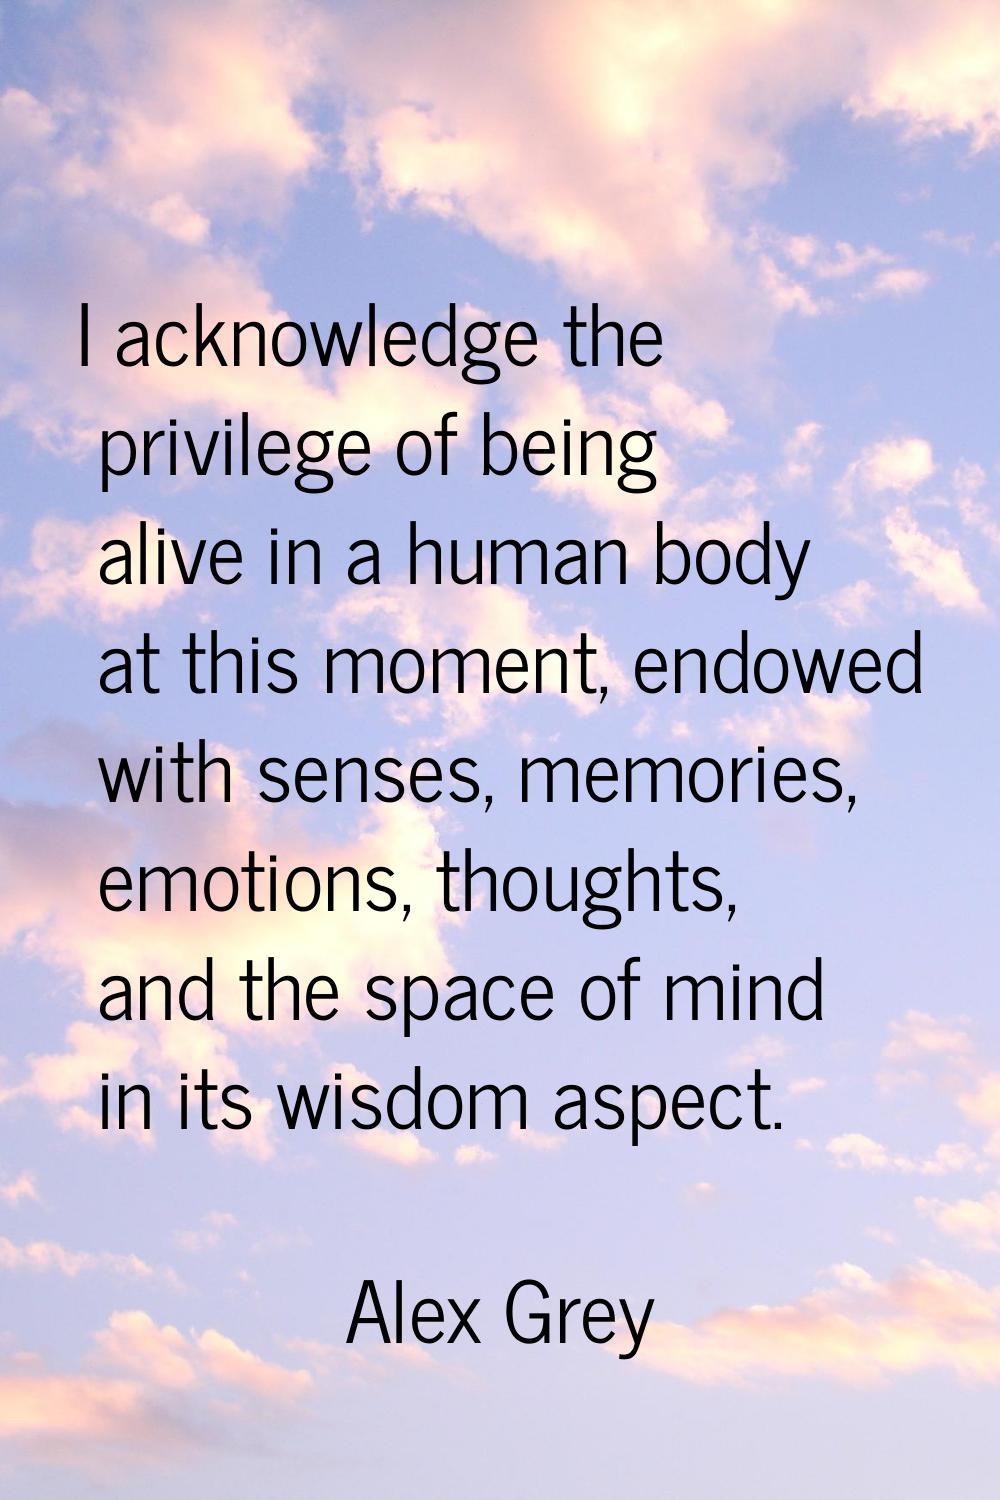 I acknowledge the privilege of being alive in a human body at this moment, endowed with senses, mem